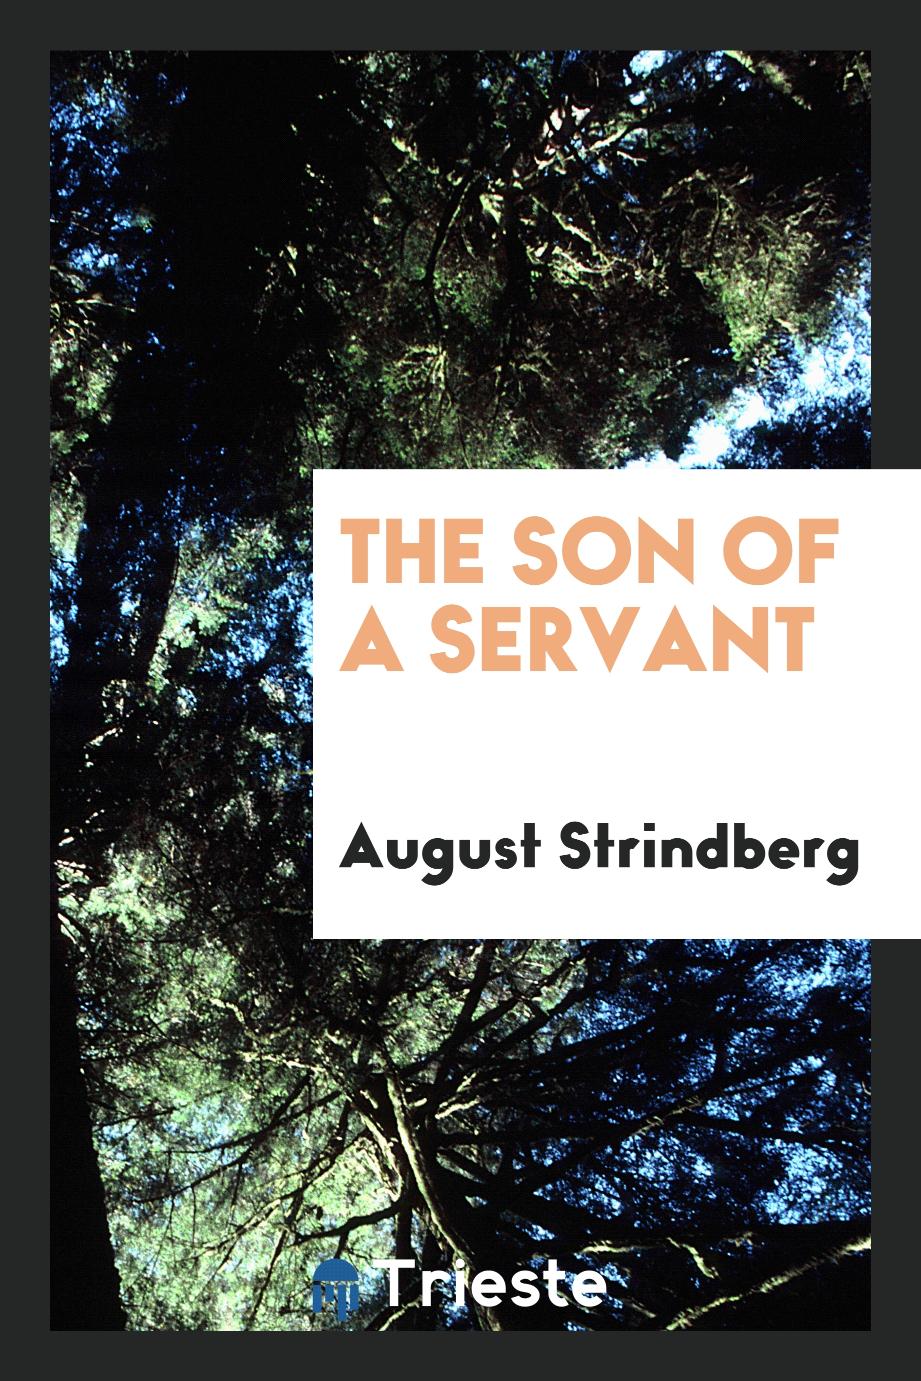 The son of a servant